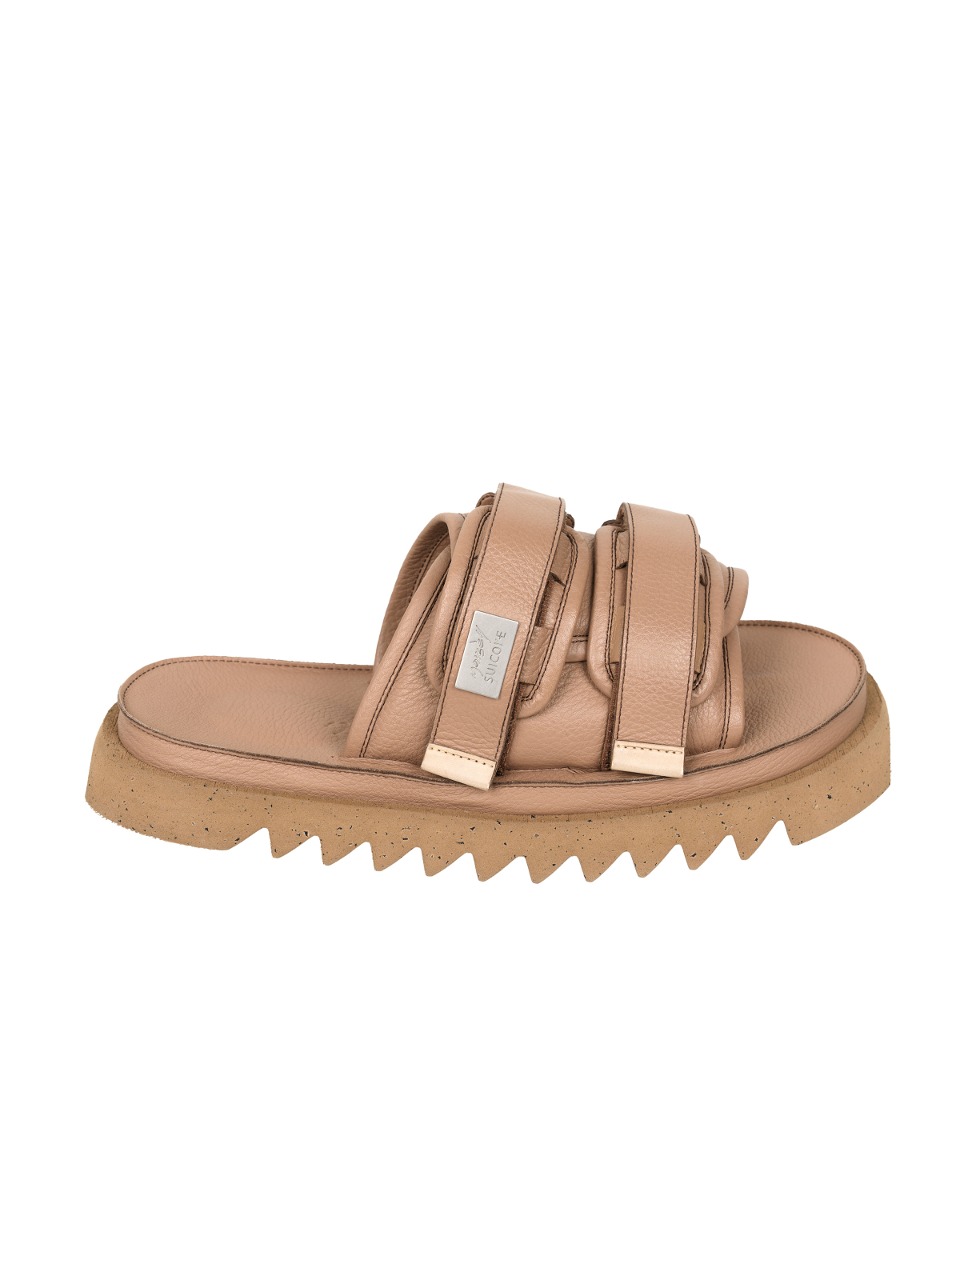 MARSELL X SUICOKE - MOTO LEATHER SLIDES (BROWN)